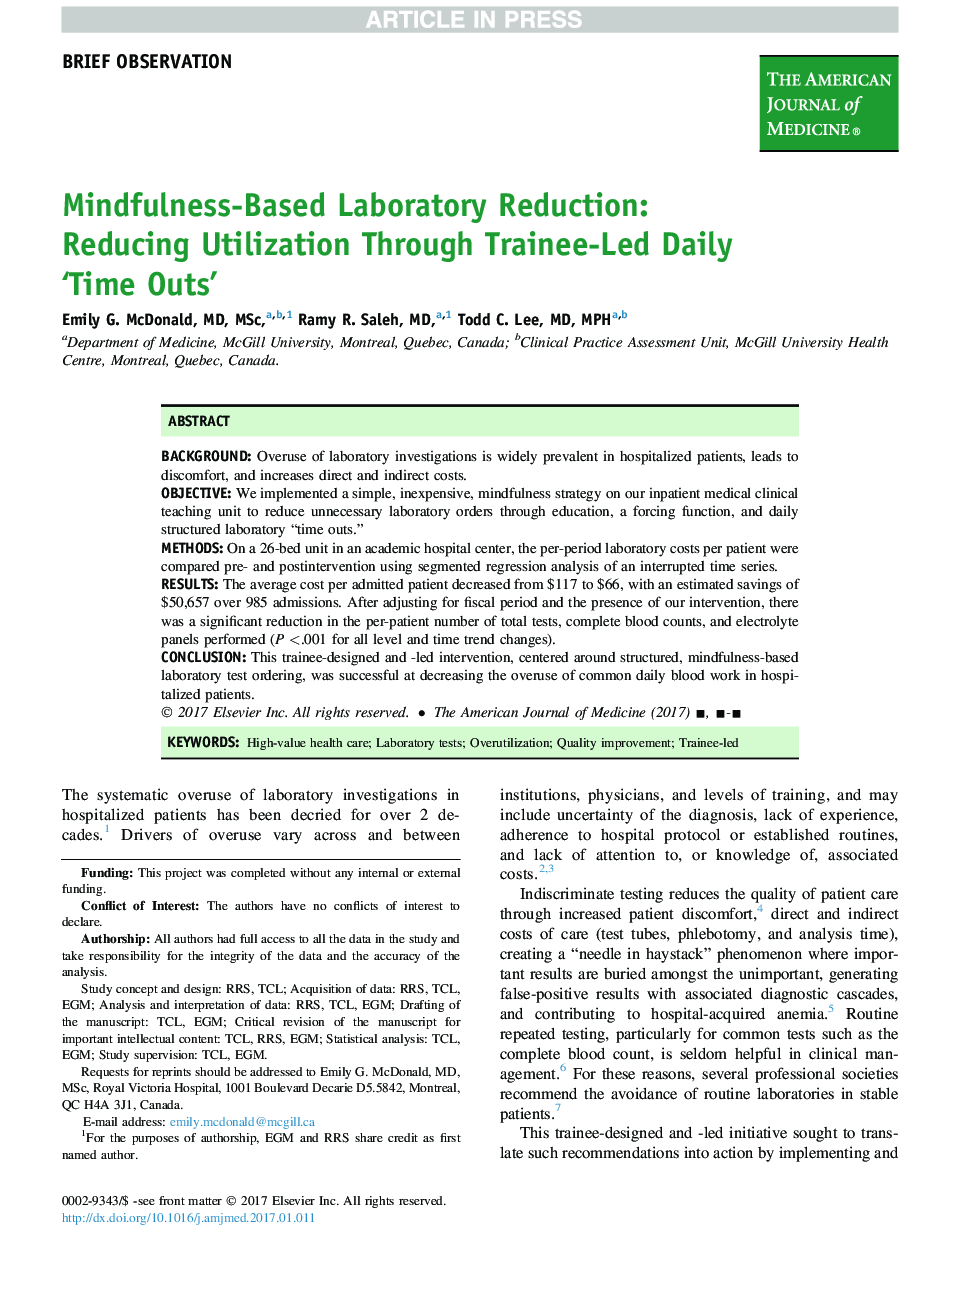 Mindfulness-Based Laboratory Reduction: Reducing Utilization Through Trainee-Led Daily 'Time Outs'